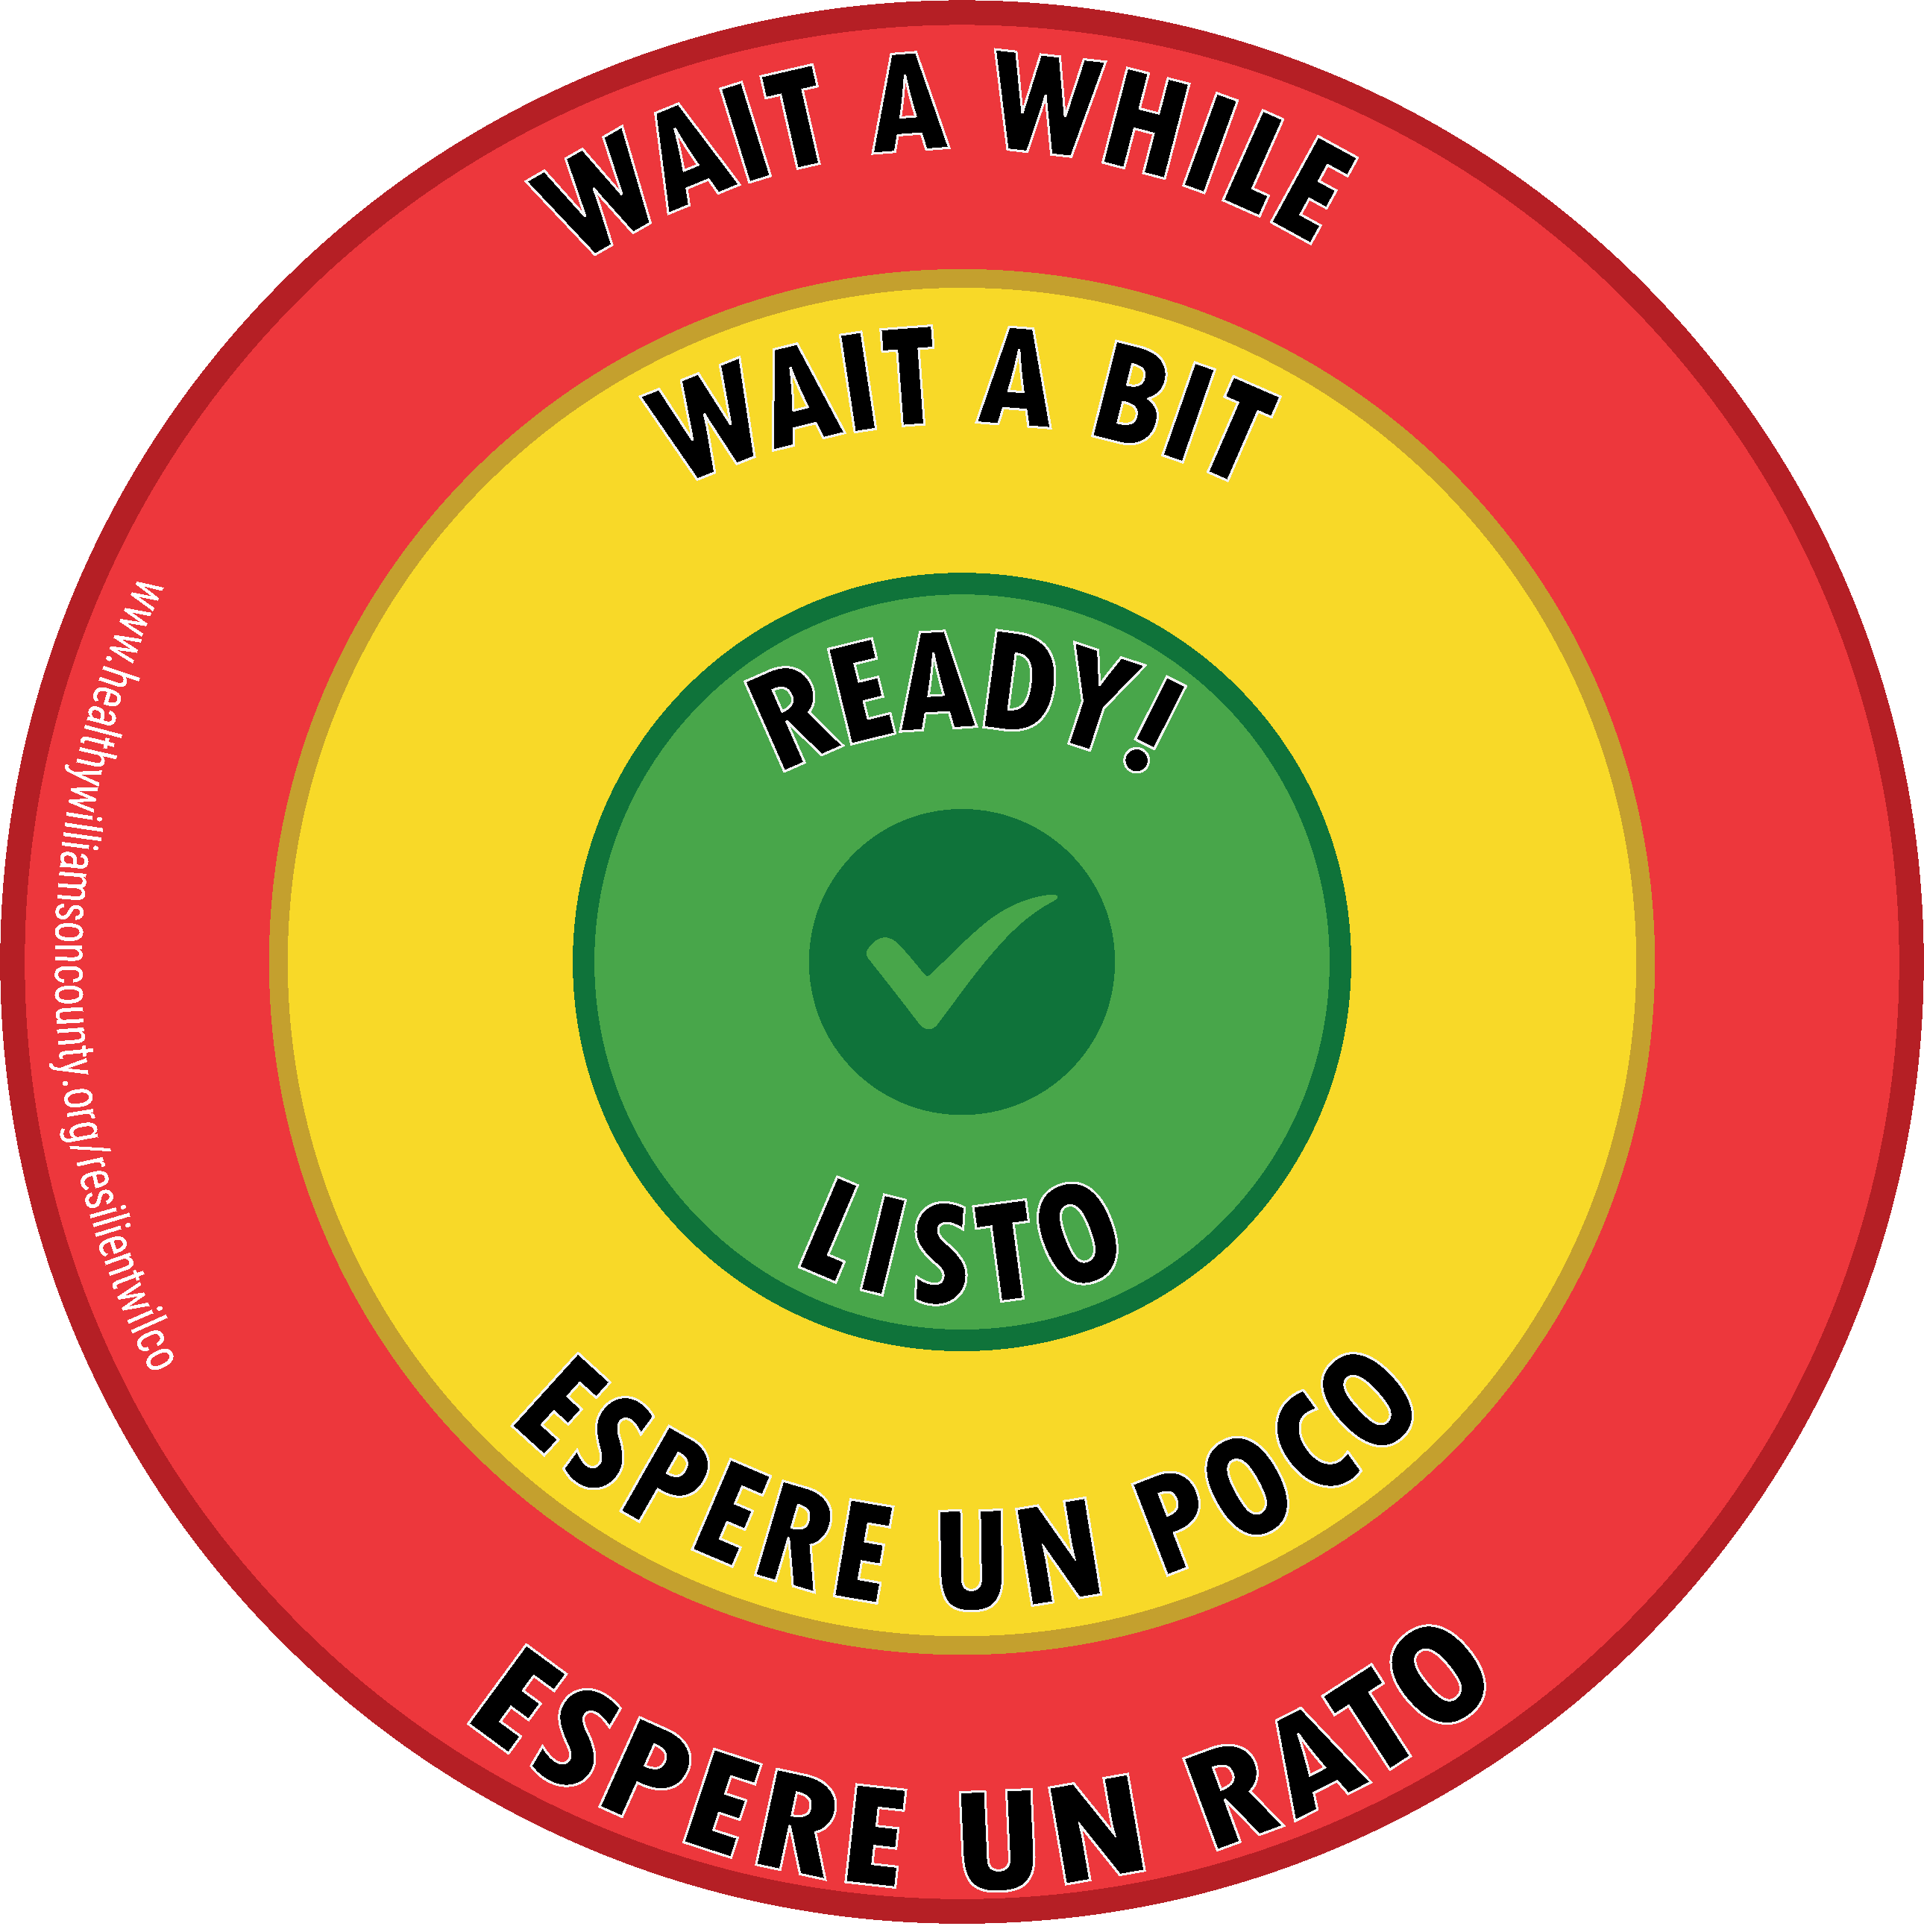 resilient wilco bullseye with levels (from outermost to innermost): "wait a while, wait a bit, ready!" and in spanish, "listo, espere un poco, espere un rato"